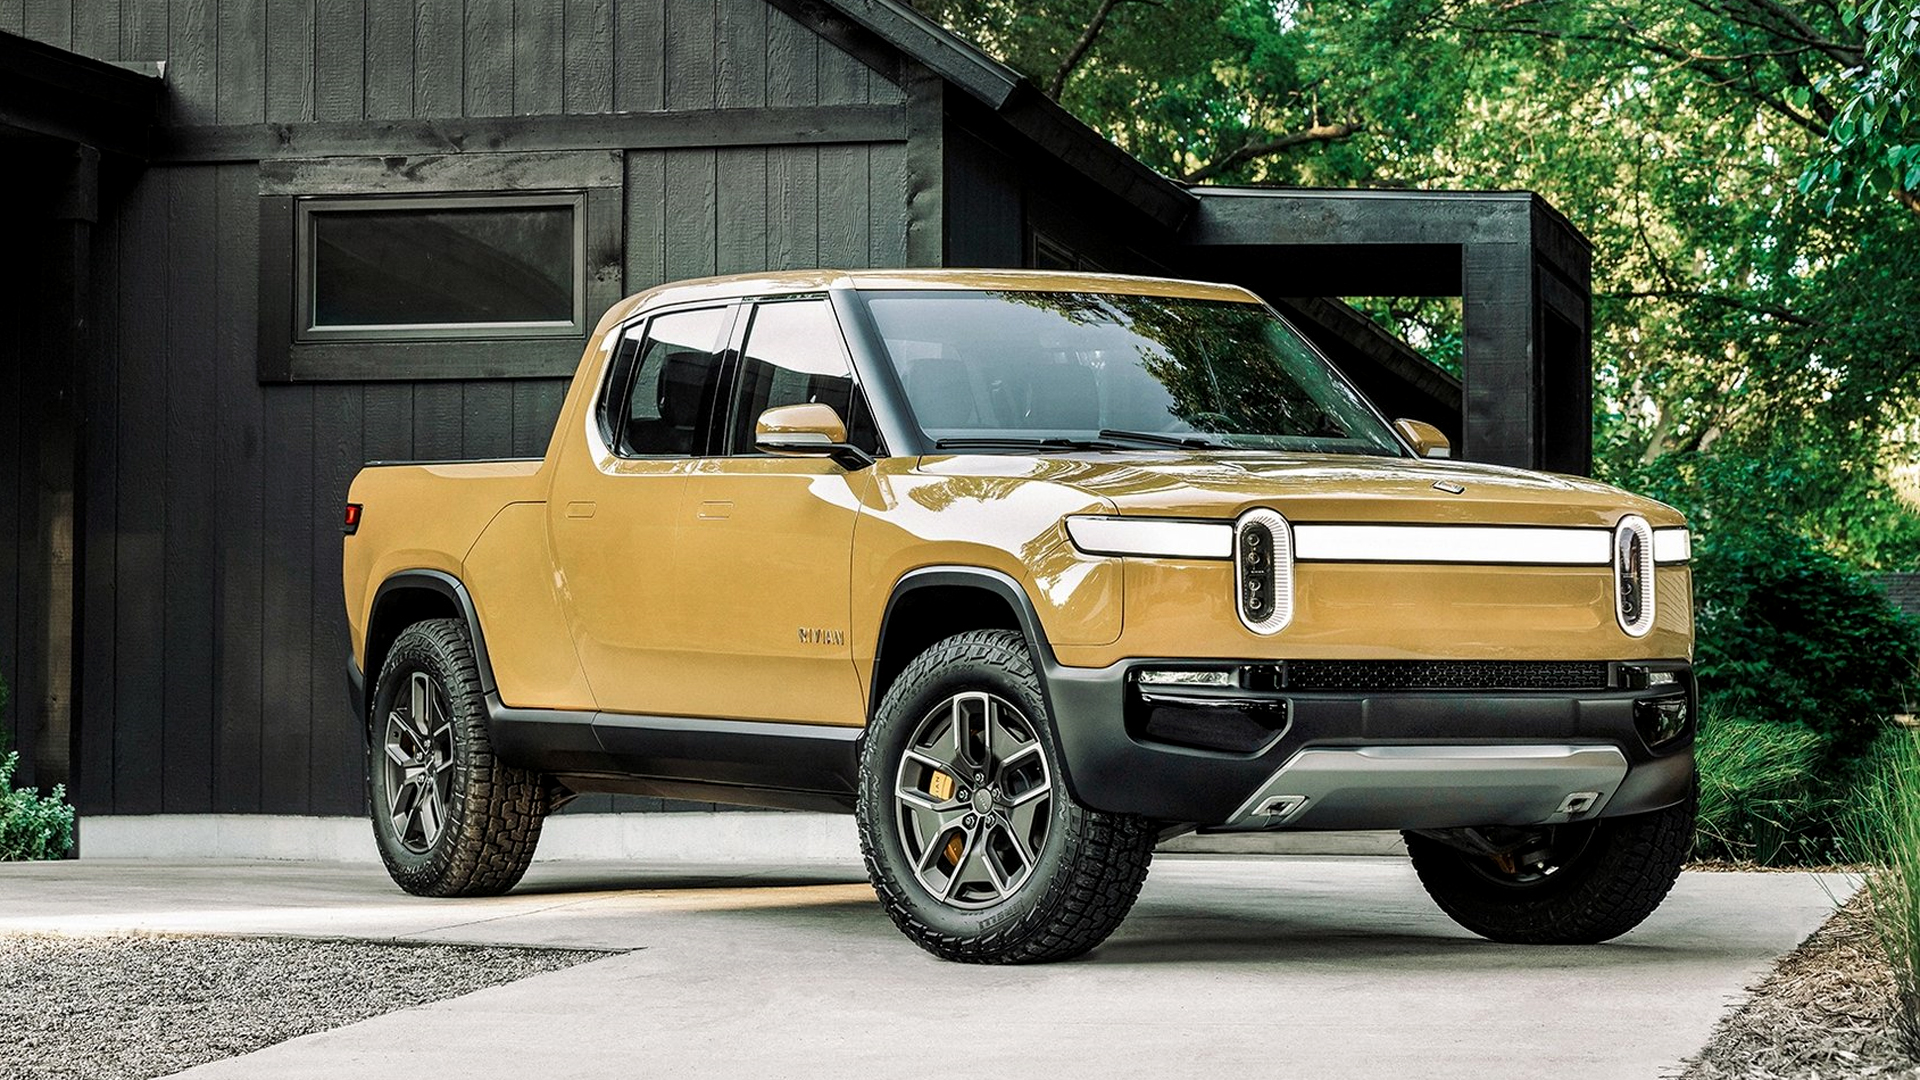 A Rivian R1T electric truck in yellow